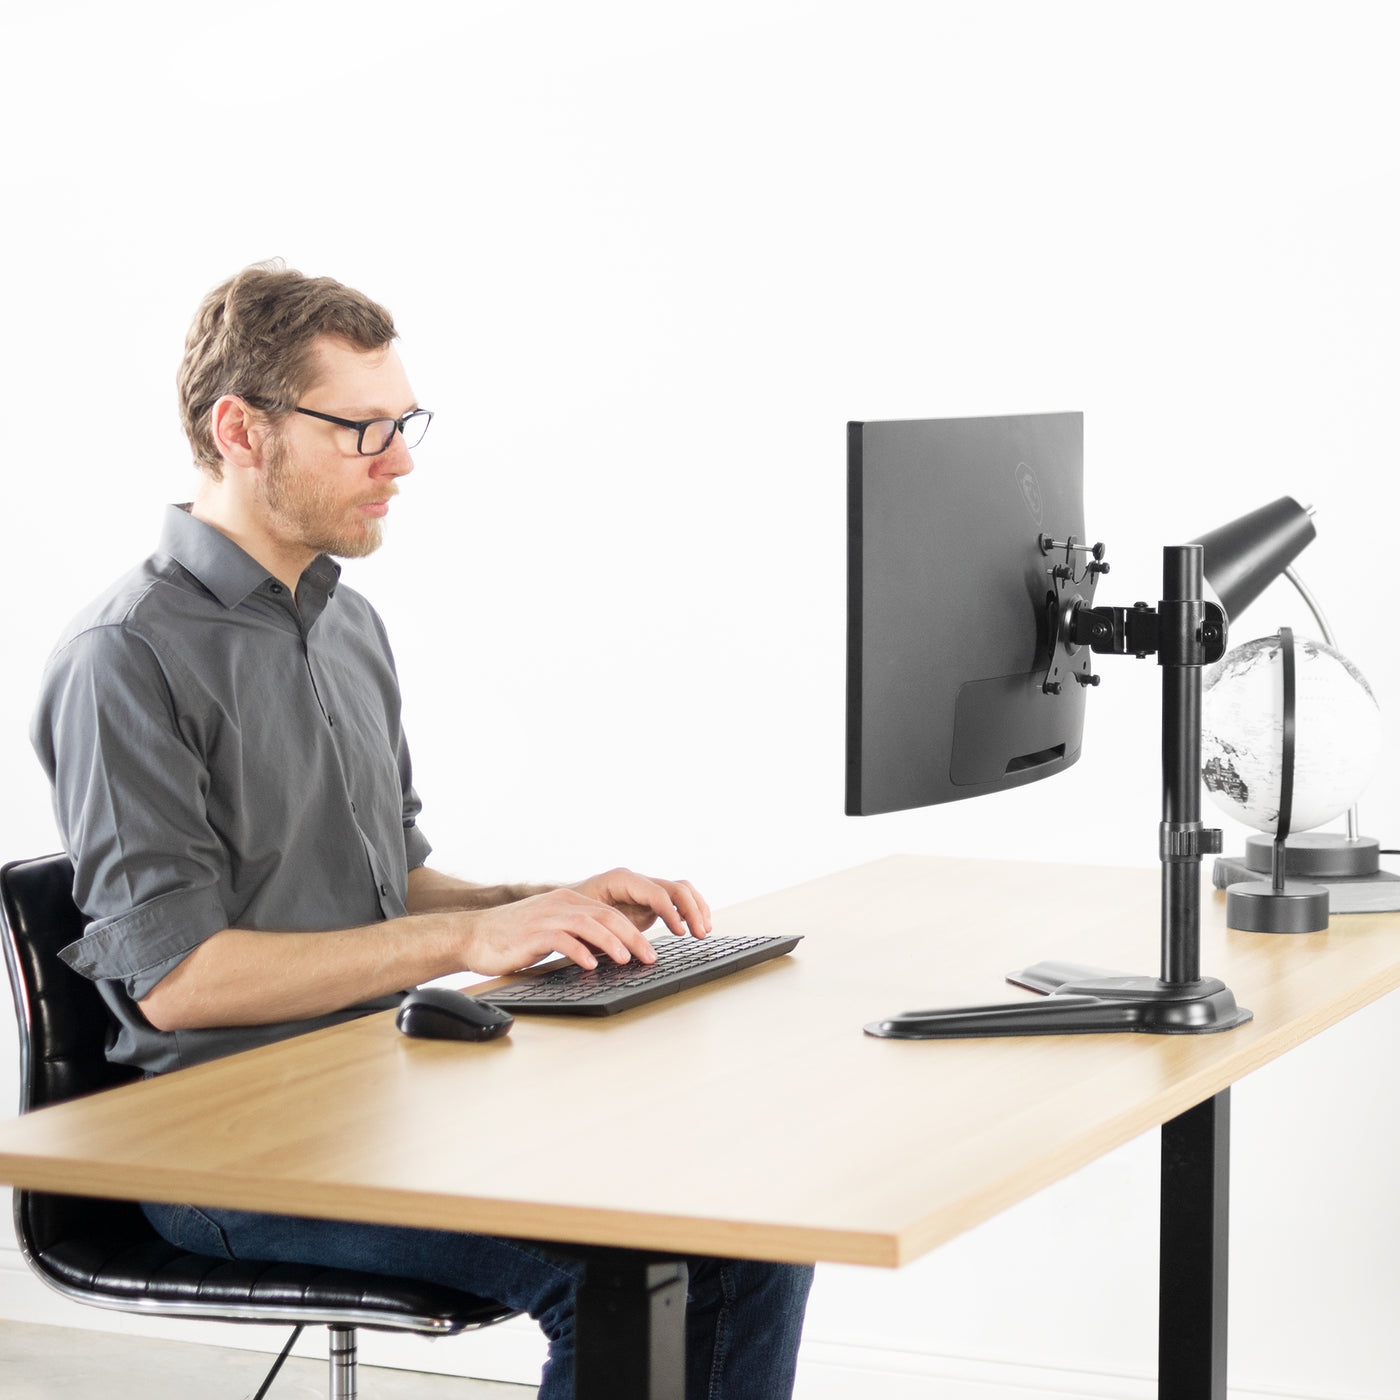 A person working at an ergonomic desk with a mounted Viotek monitor screen.